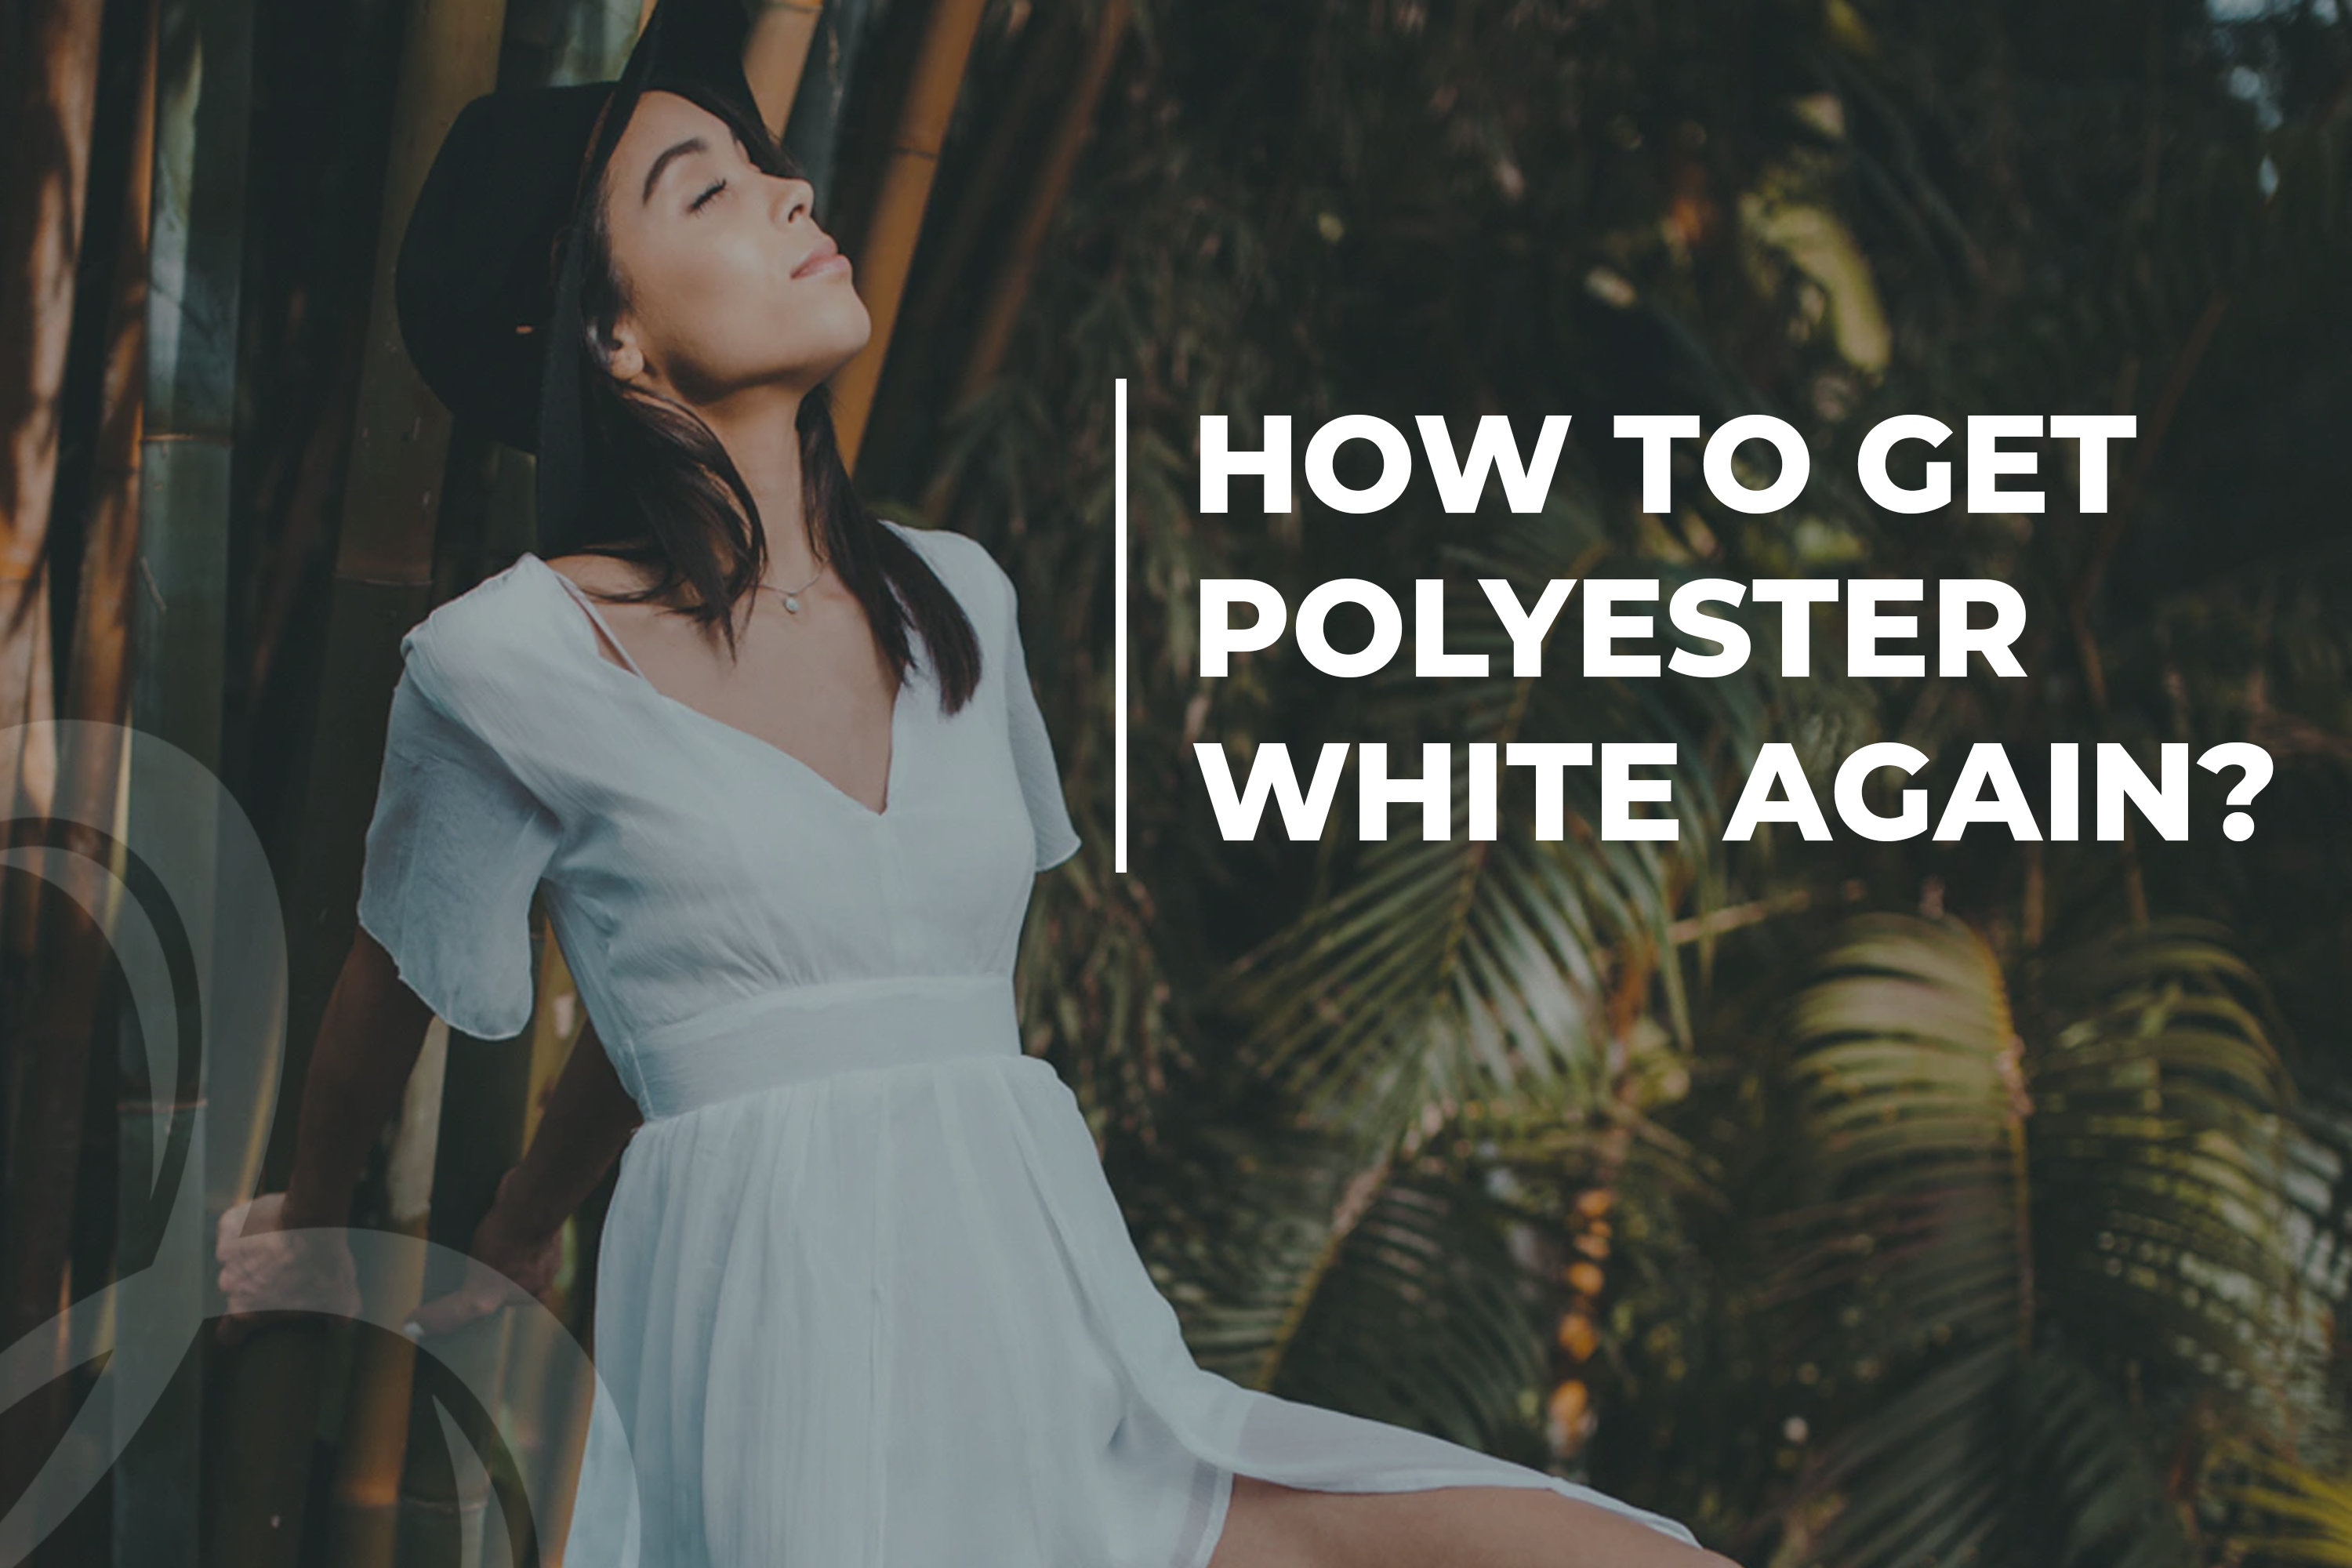 How to get polyester white again